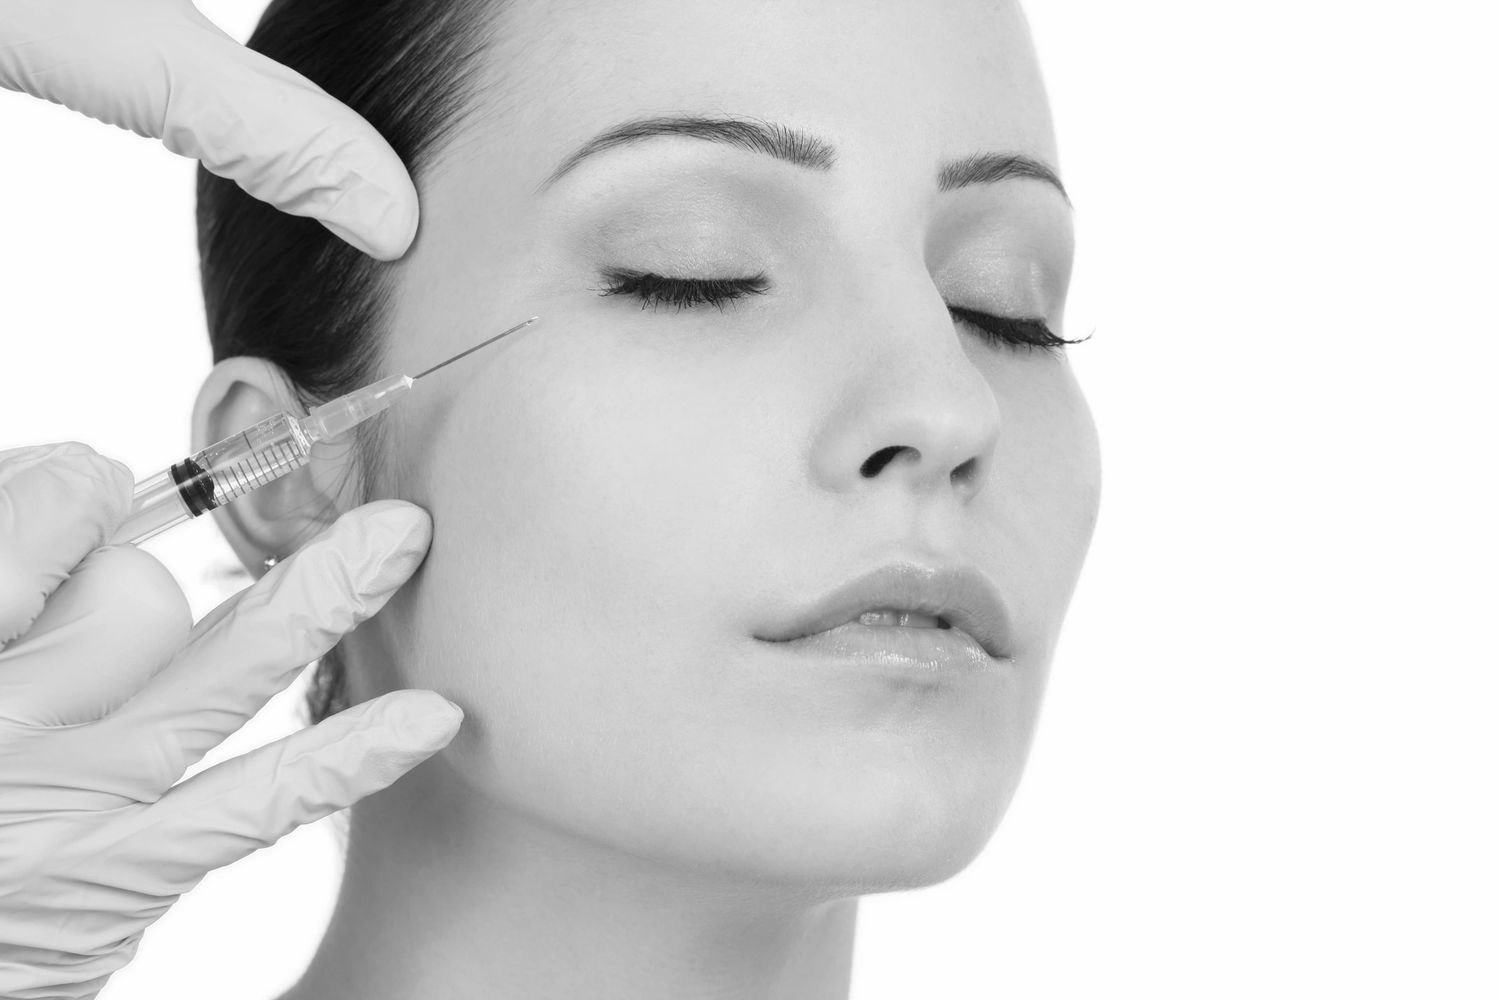 botox fillers, skin booster, antiwrinkle injections